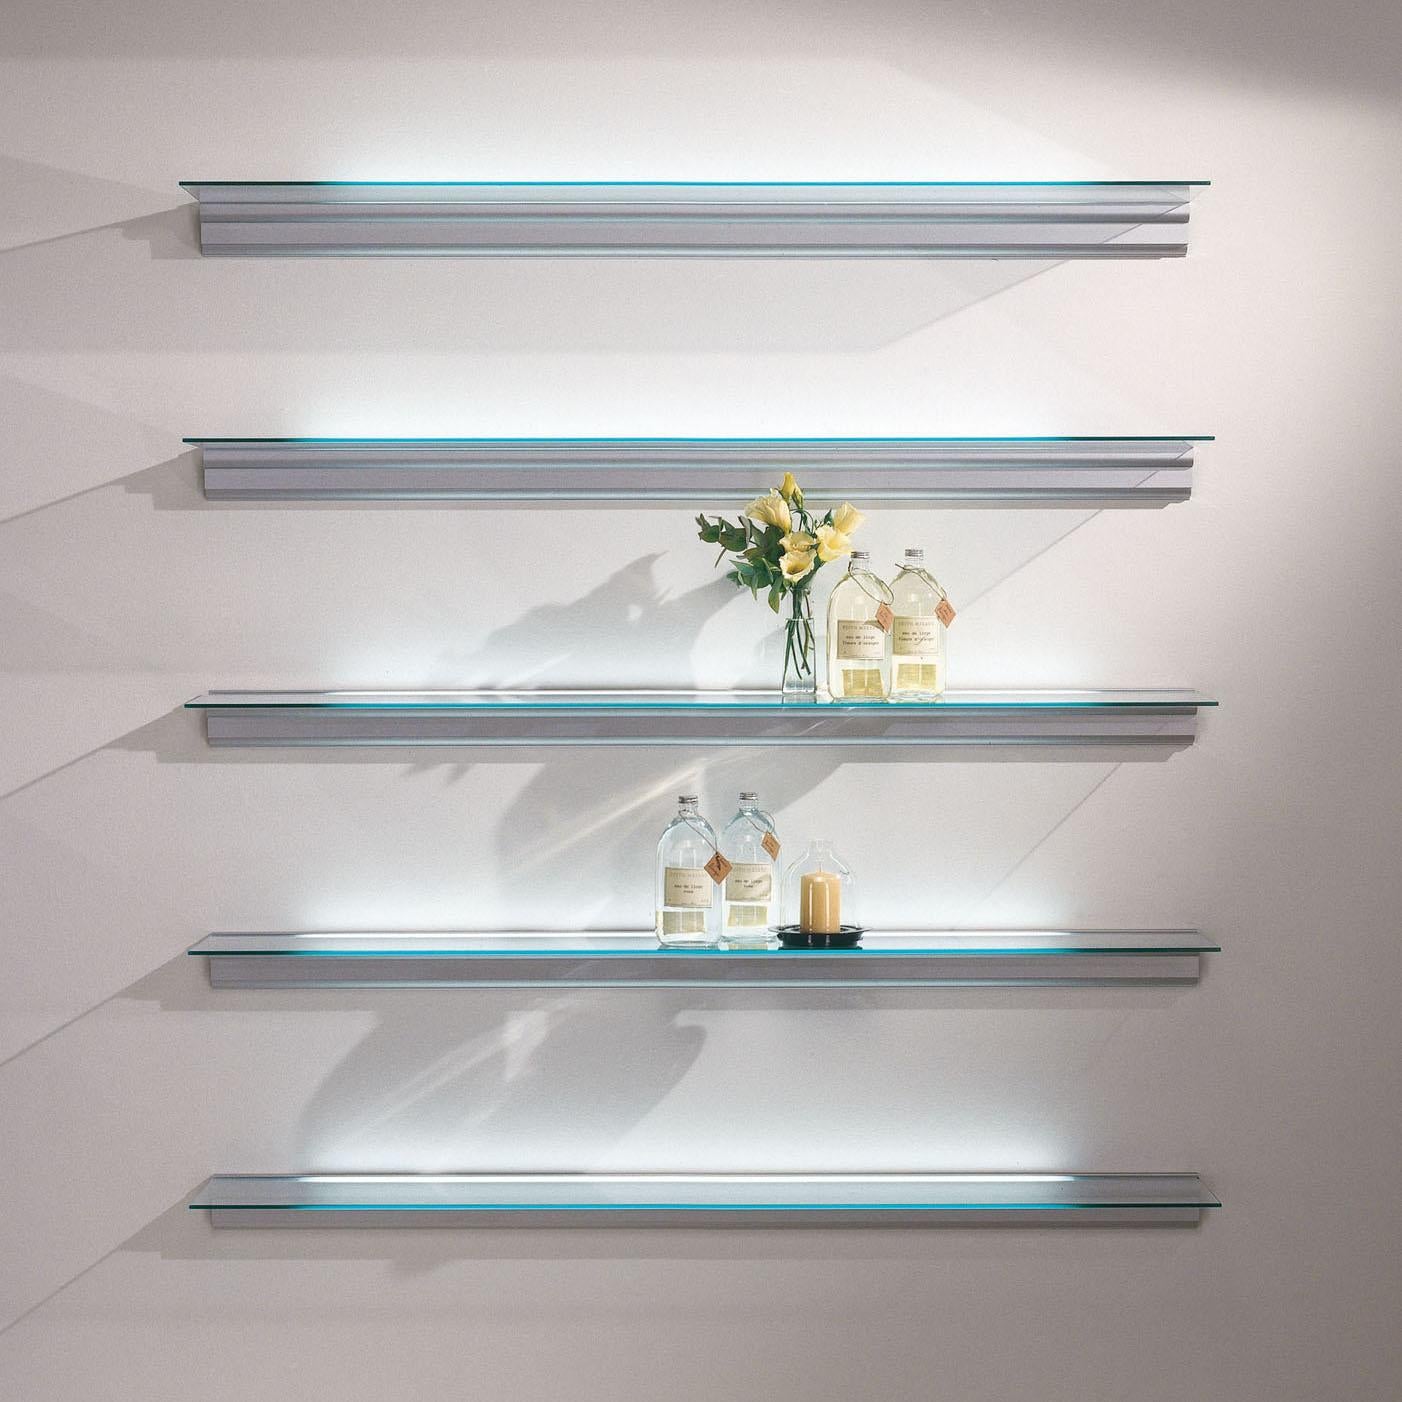 Shelve designed by Lluís Cloet and Oscar Tusquets in 1973 manufactured by BD.

An extruded aluminium bracket which supports a glass shelf. With a fluorescent strip in its interior, the unit becomes a luminous shelving module.This innovative design